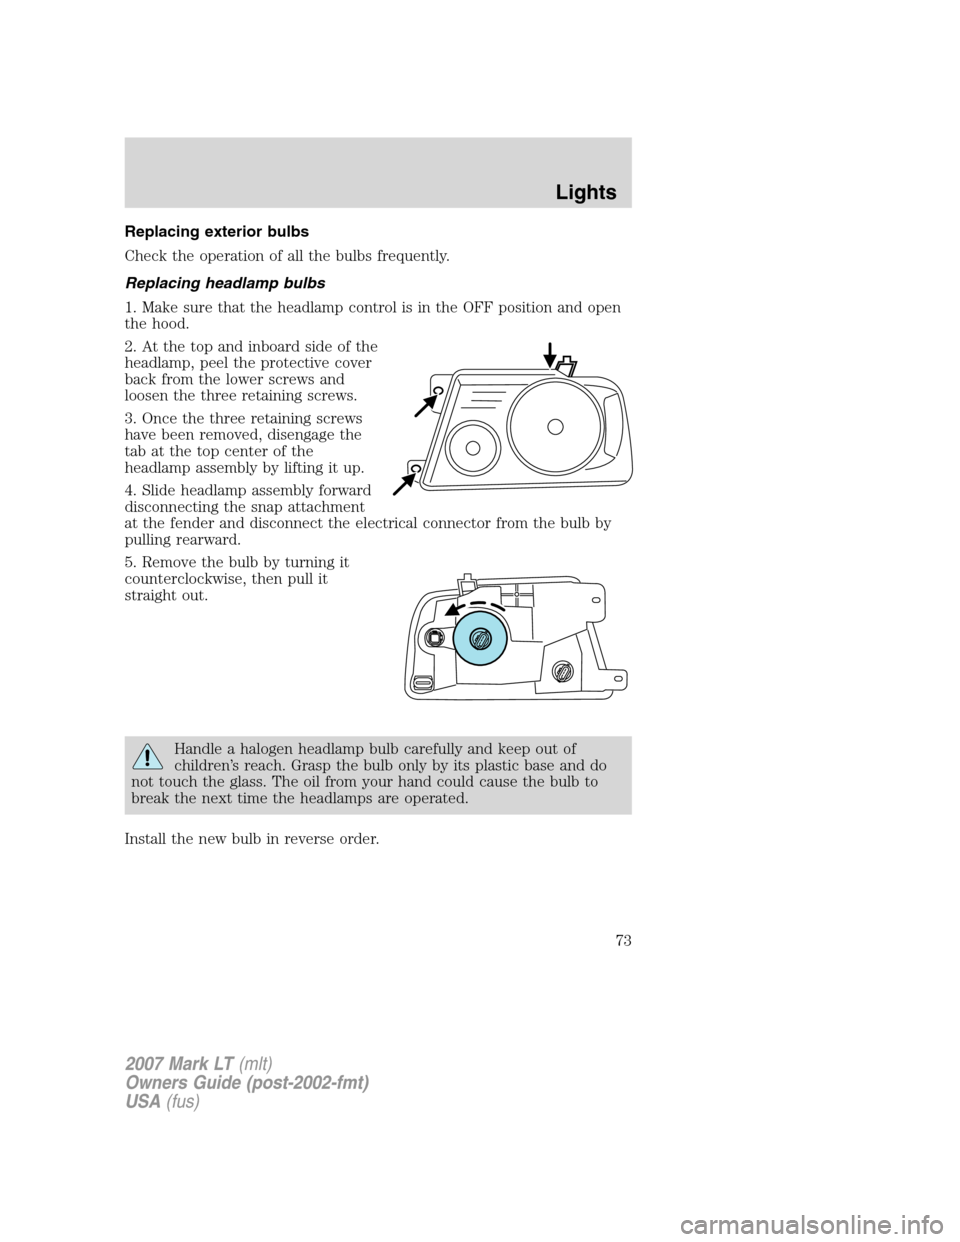 LINCOLN MARK LT 2007  Owners Manual Replacing exterior bulbs
Check the operation of all the bulbs frequently.
Replacing headlamp bulbs
1. Make sure that the headlamp control is in the OFF position and open
the hood.
2. At the top and in